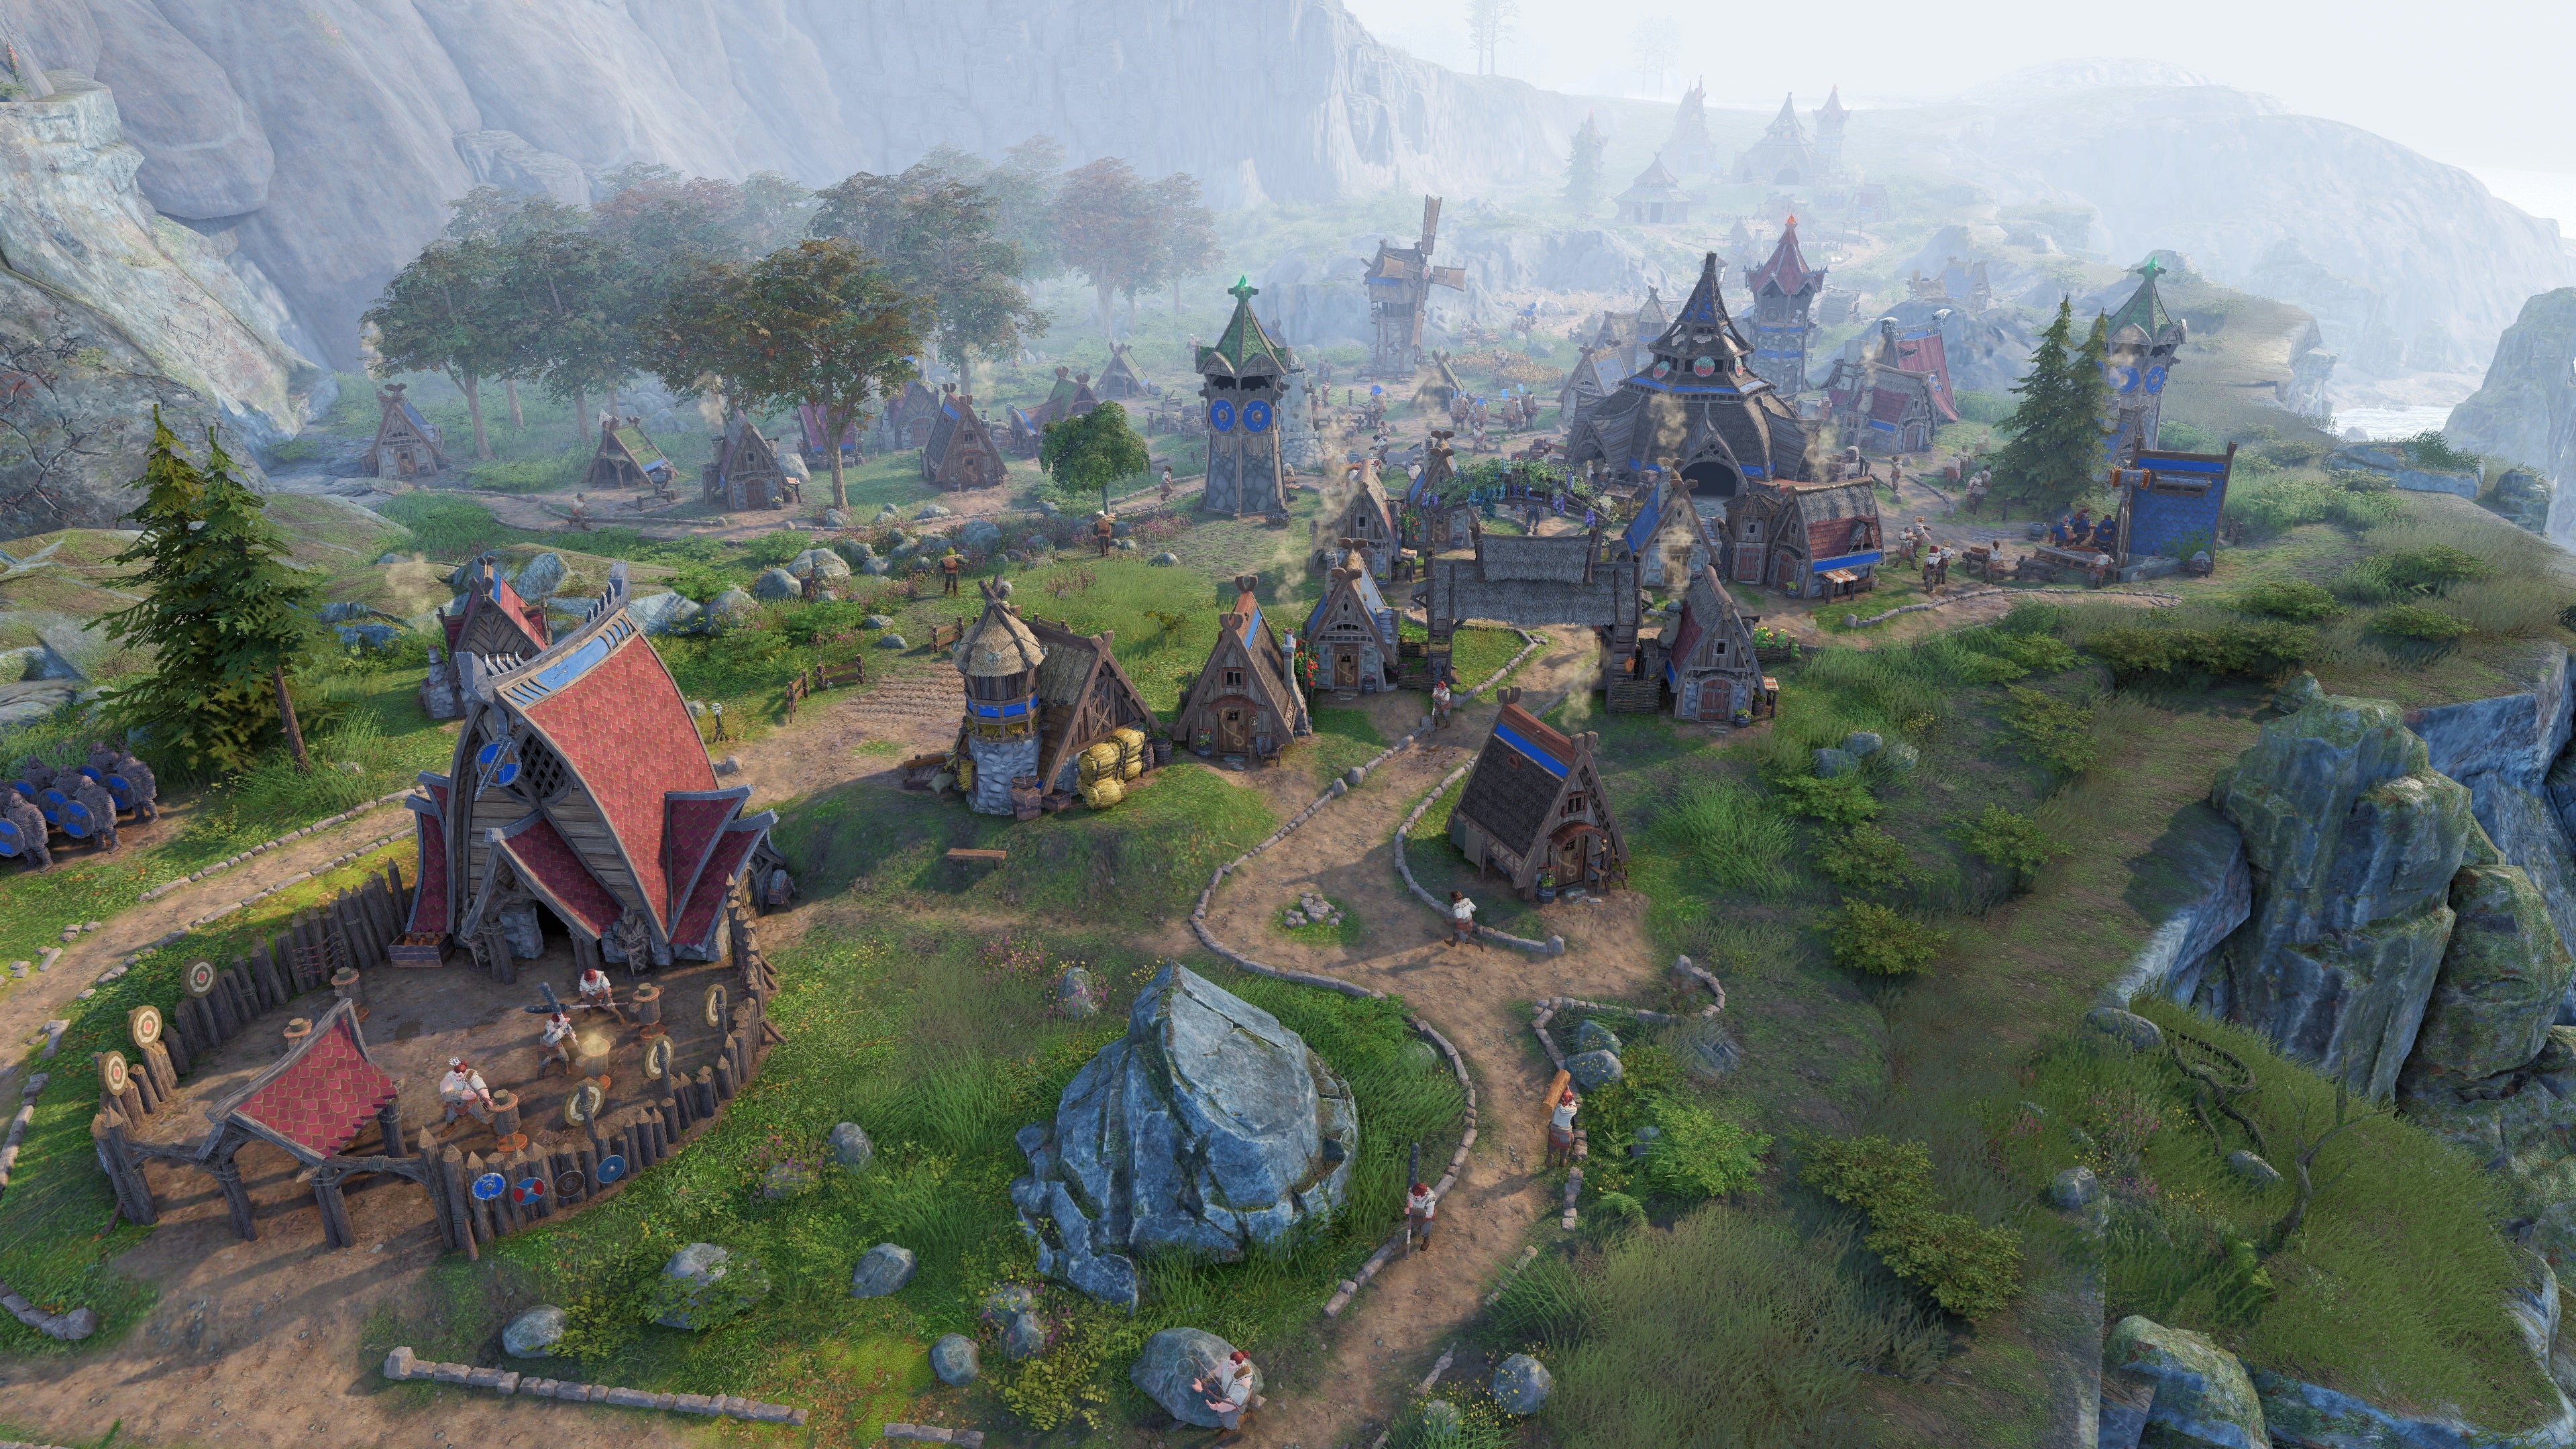 A viking inspired village in The Settlers: New Allies